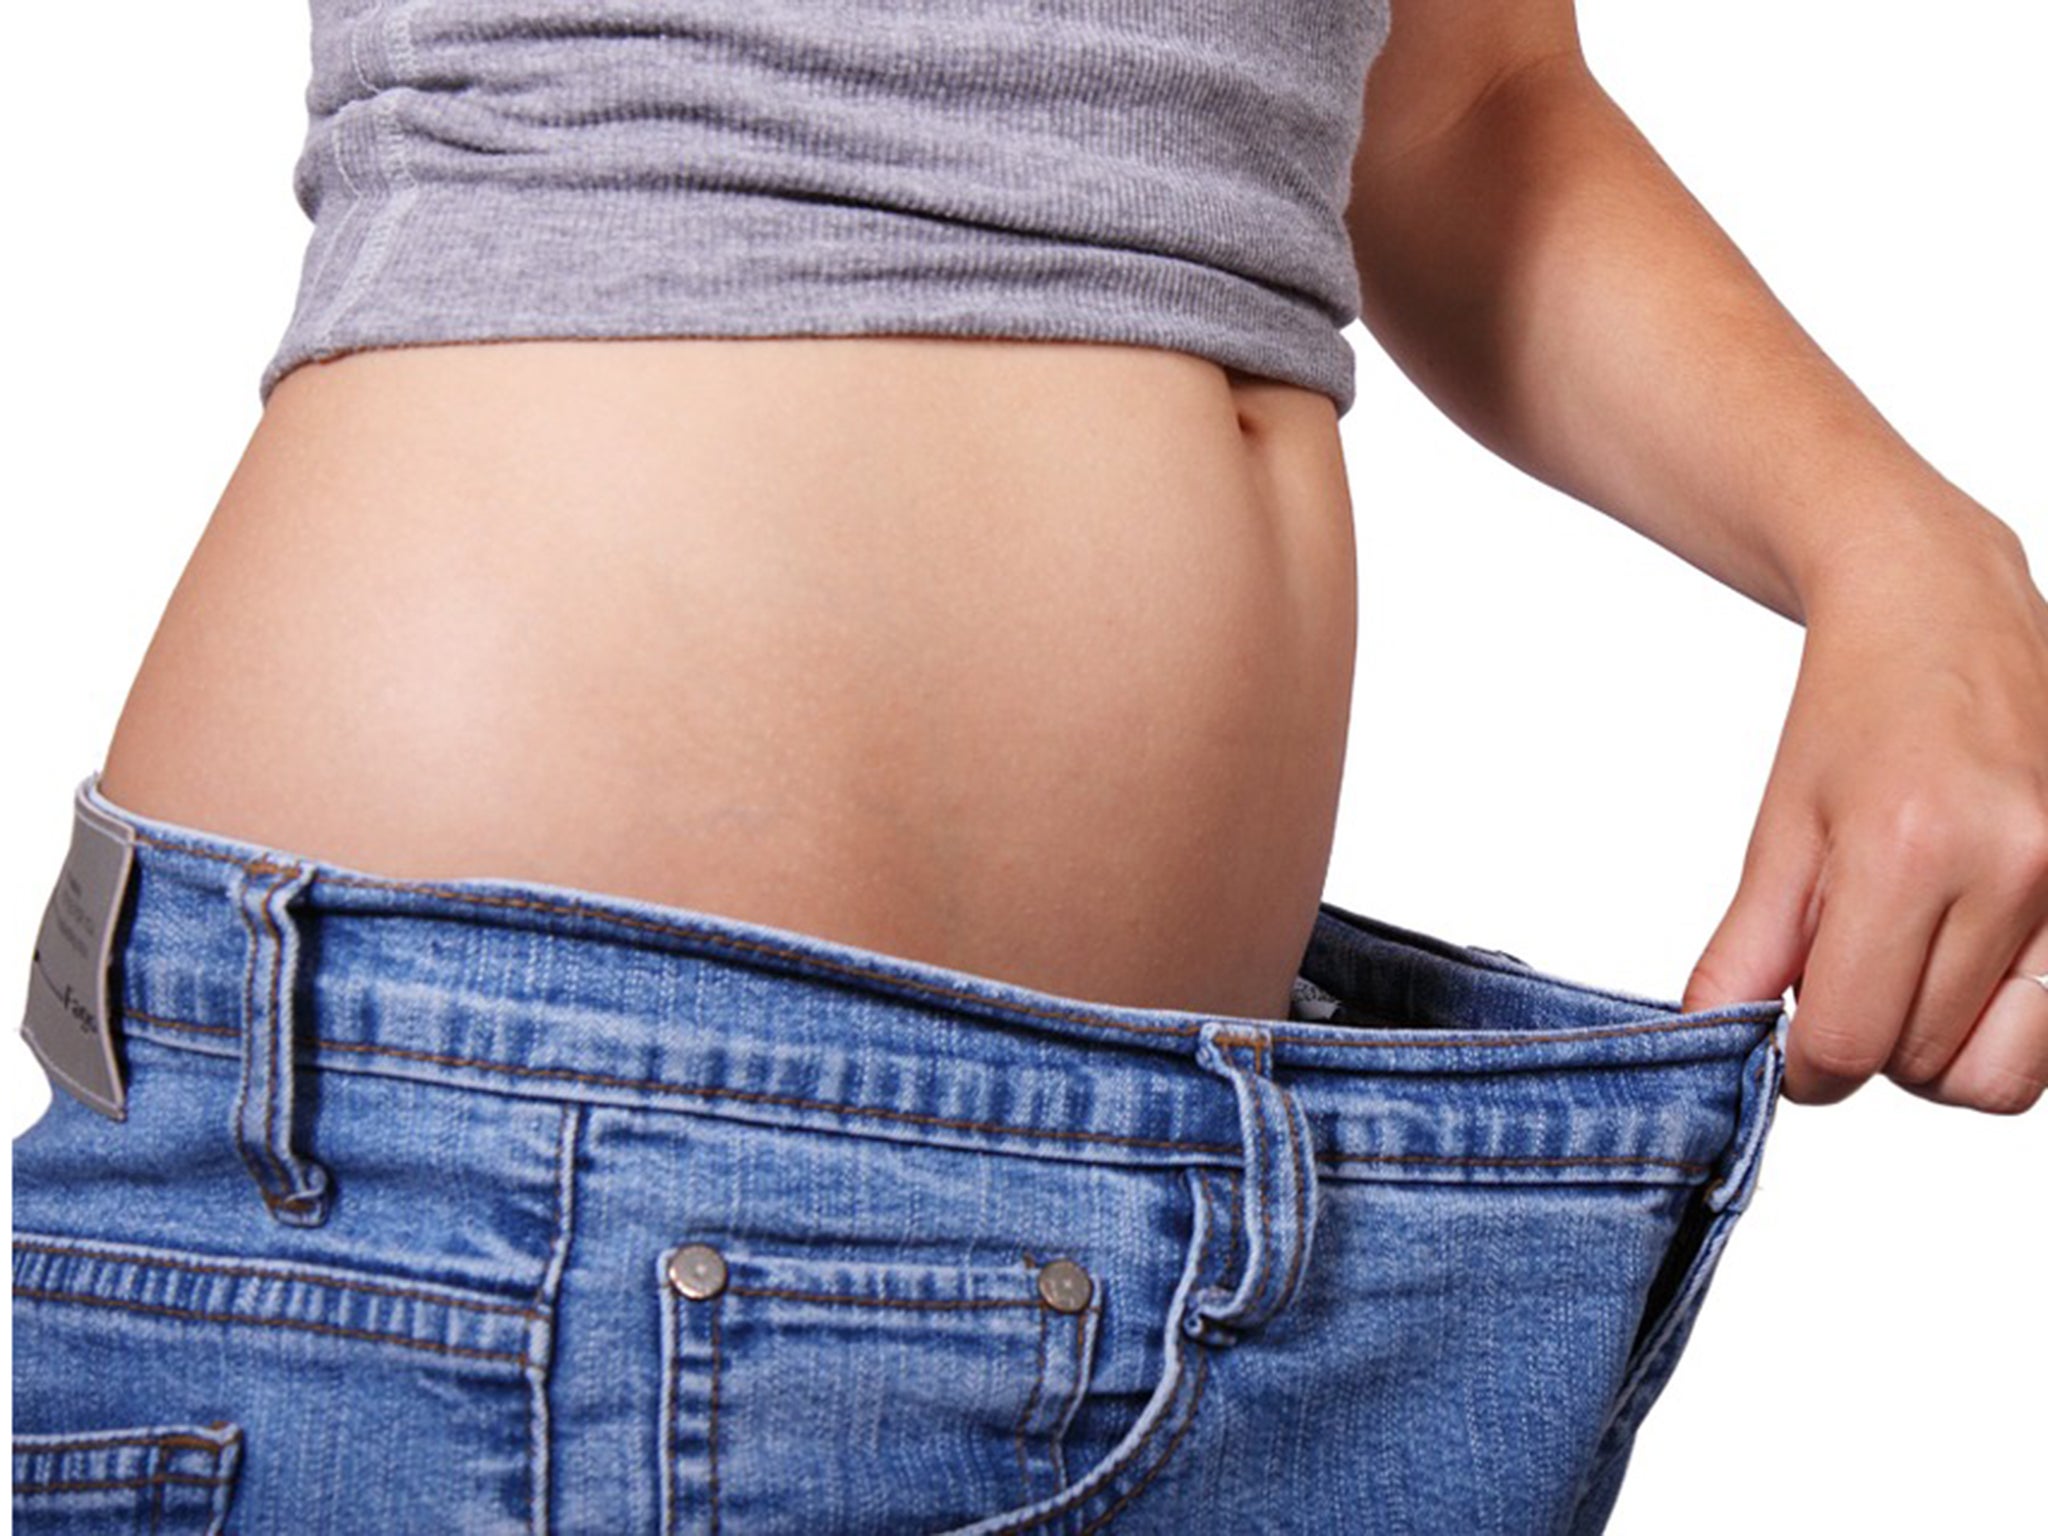 Professor Tim Spector says our gut bacteria is vital to weight loss